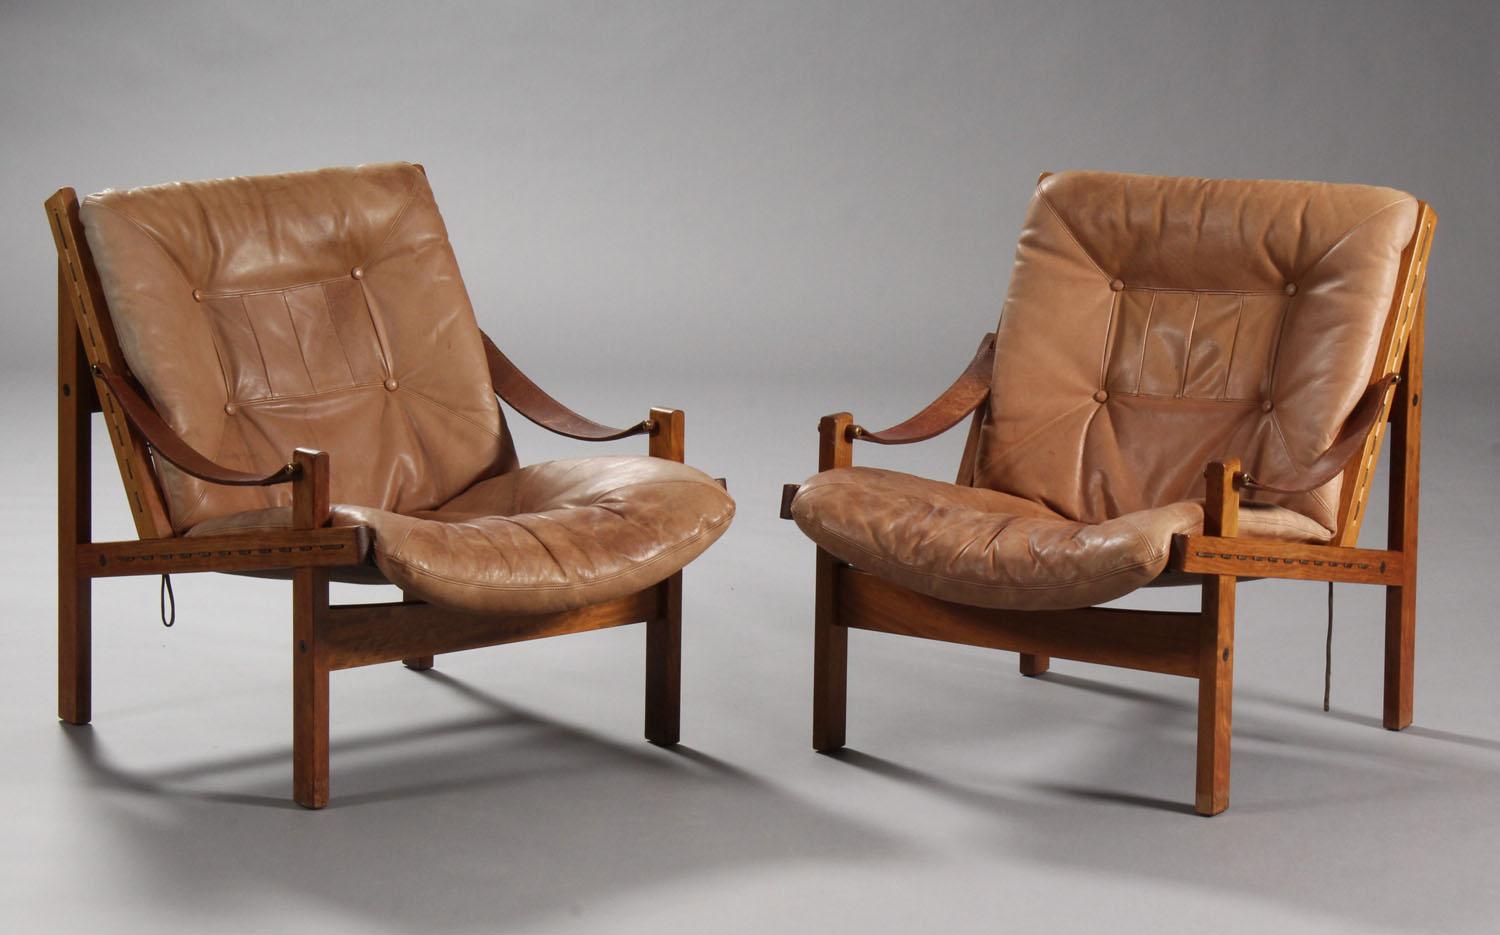 Thorbjørn Afdal, Norwegian designer. Pair of easy armchairs with solid walnut wood frame, loose cushions upholstered brown leather, safari-style, cognac-colored leather armrests.